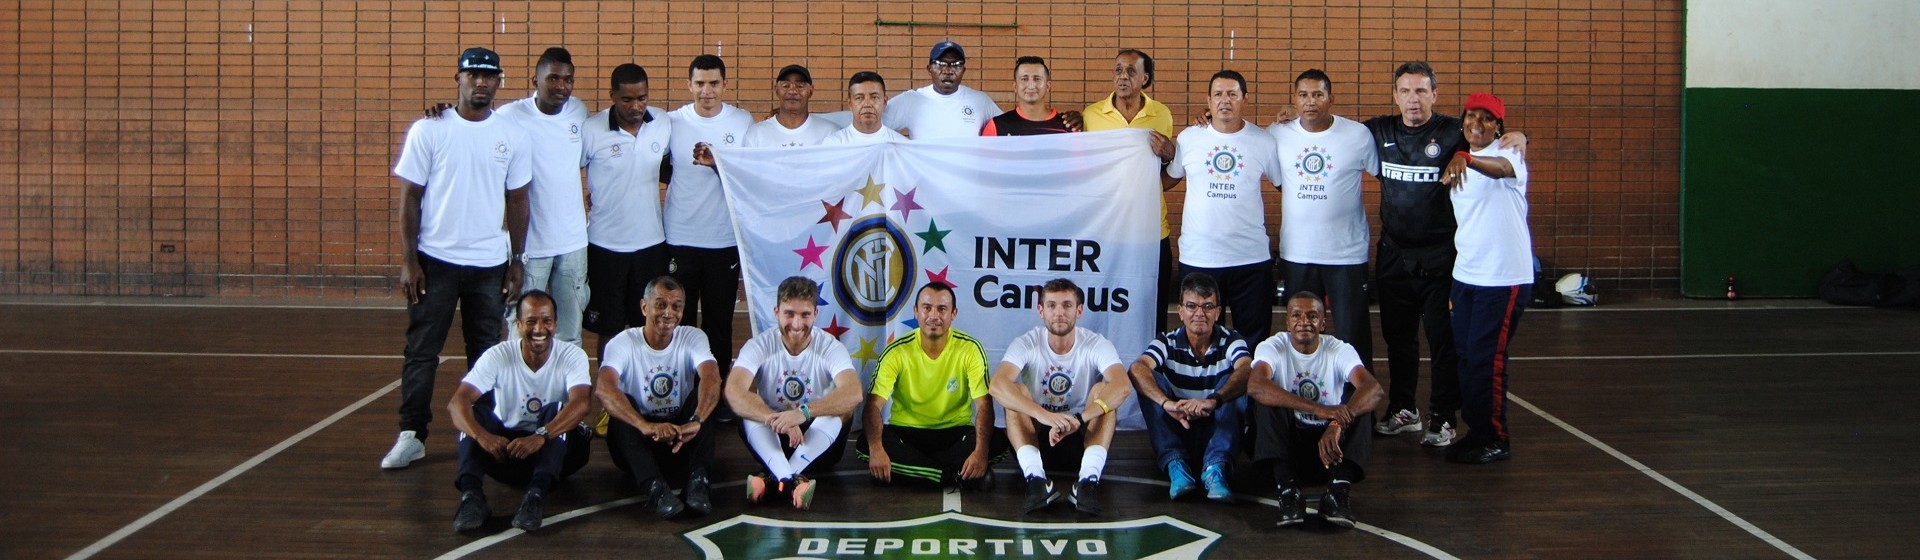 Inter Campus in South America